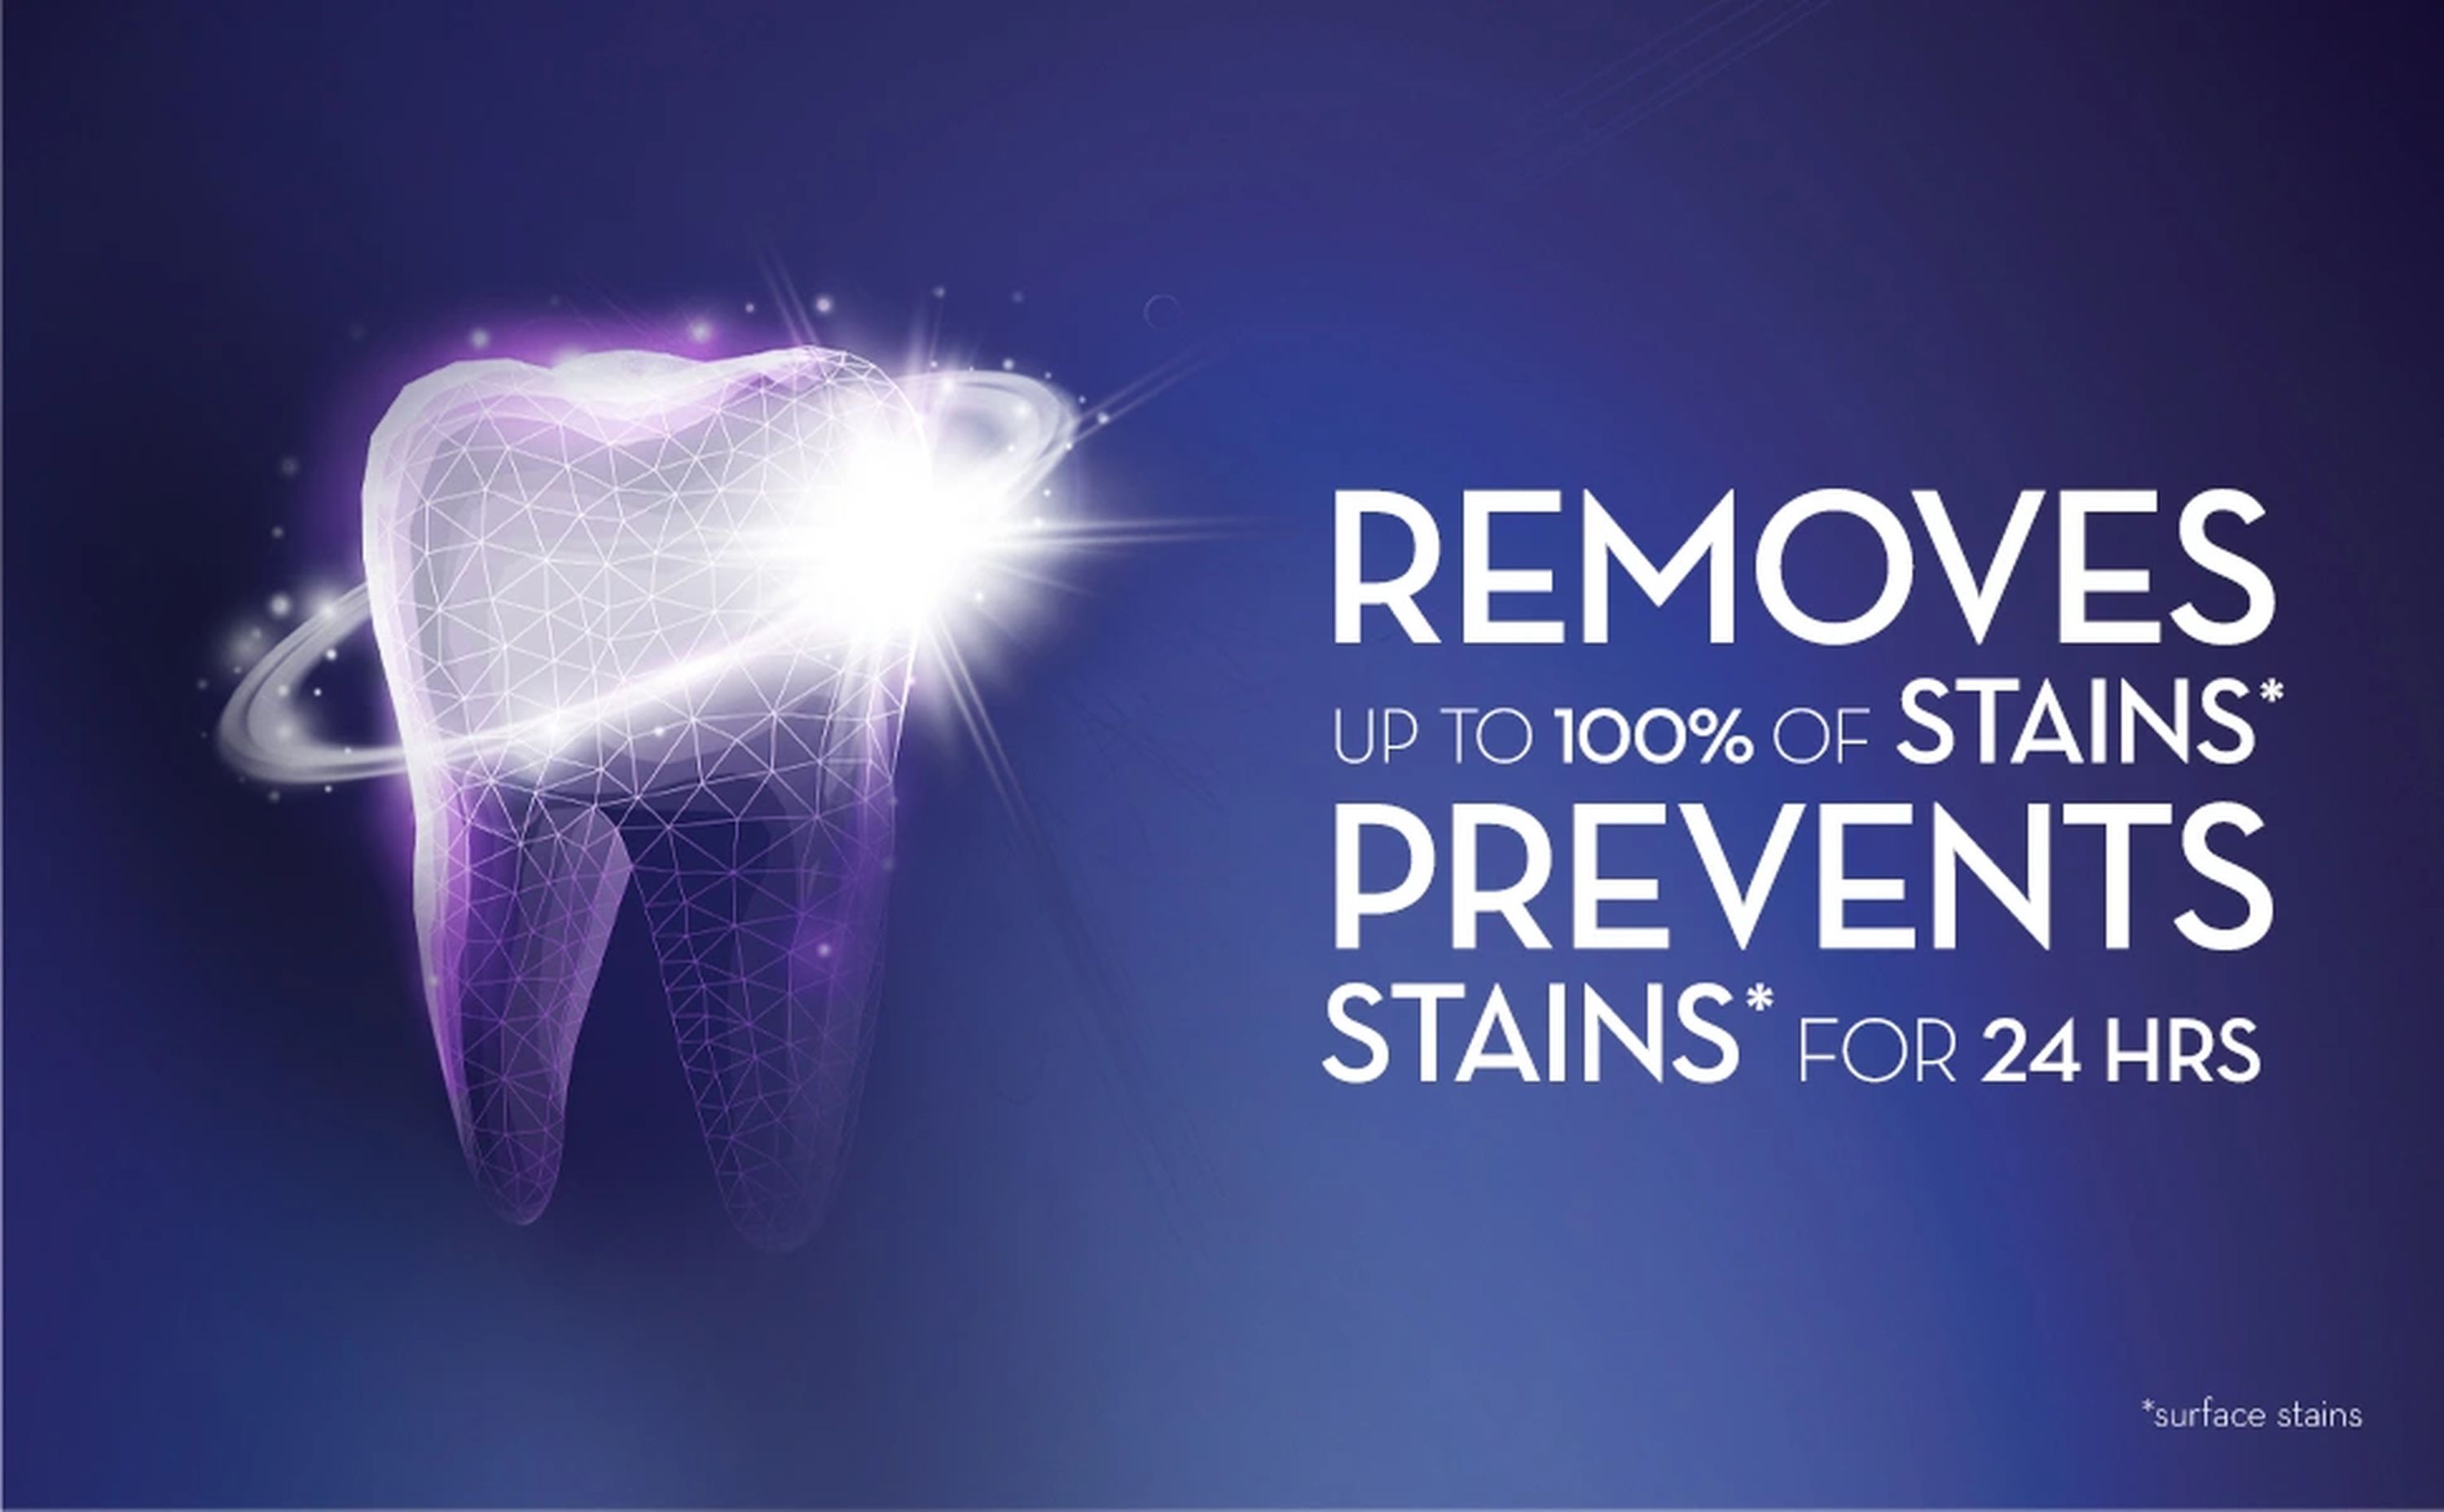 Removes up to 100% of stains. Prevents stains for 24 hours.